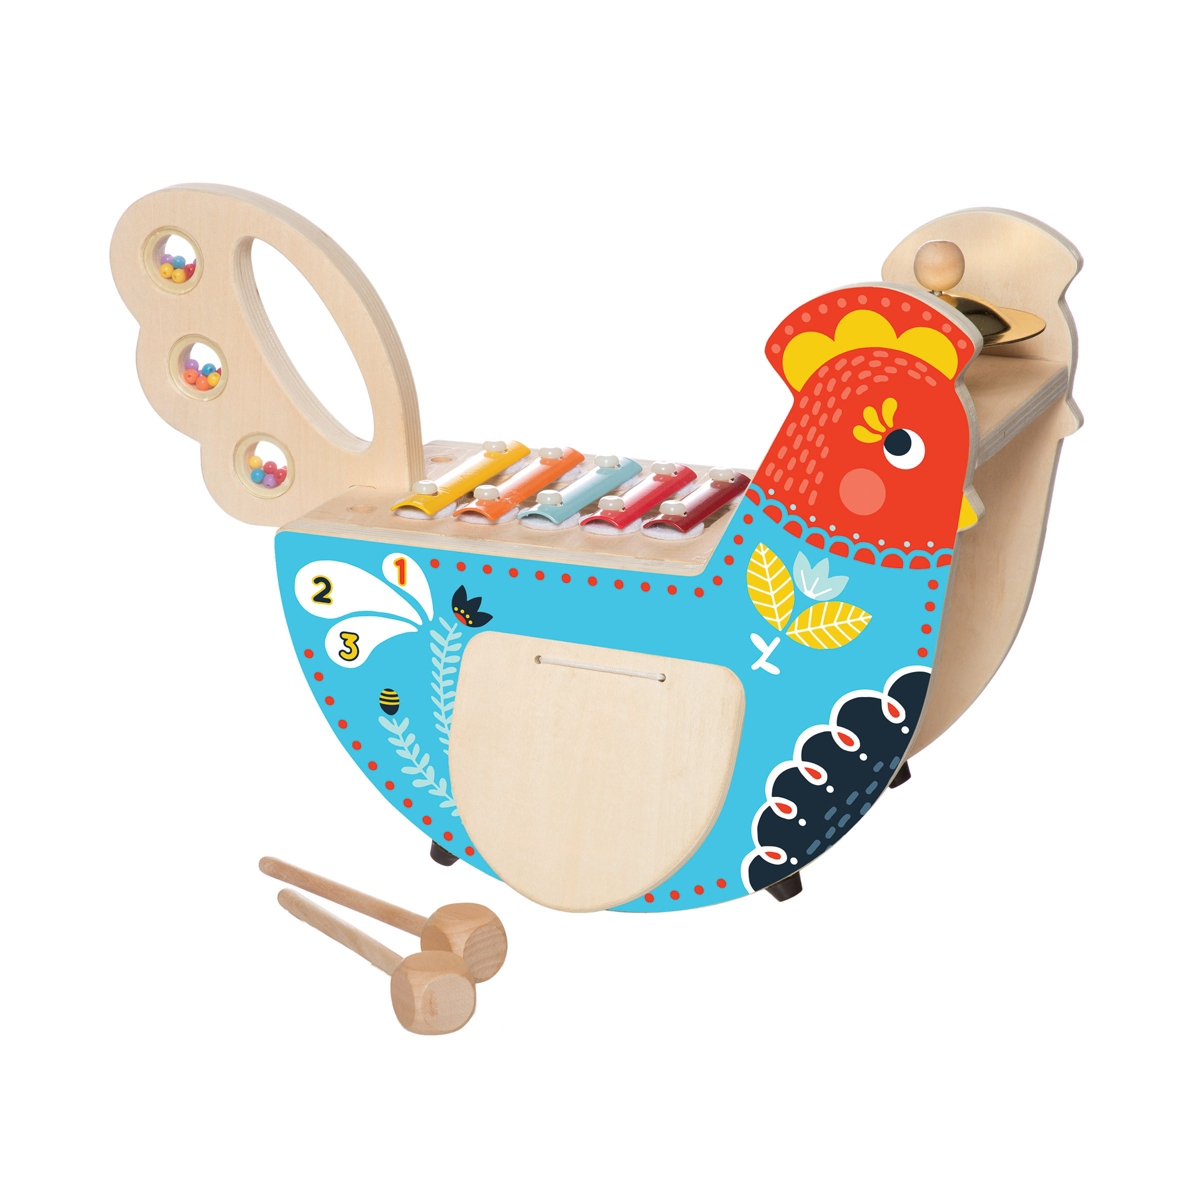 Shop Manhattan Toy Company Manhattan Toy Musical Chicken Wooden Instrument With Xylophone, Drumsticks, Cymbal, And Maraca In Multi